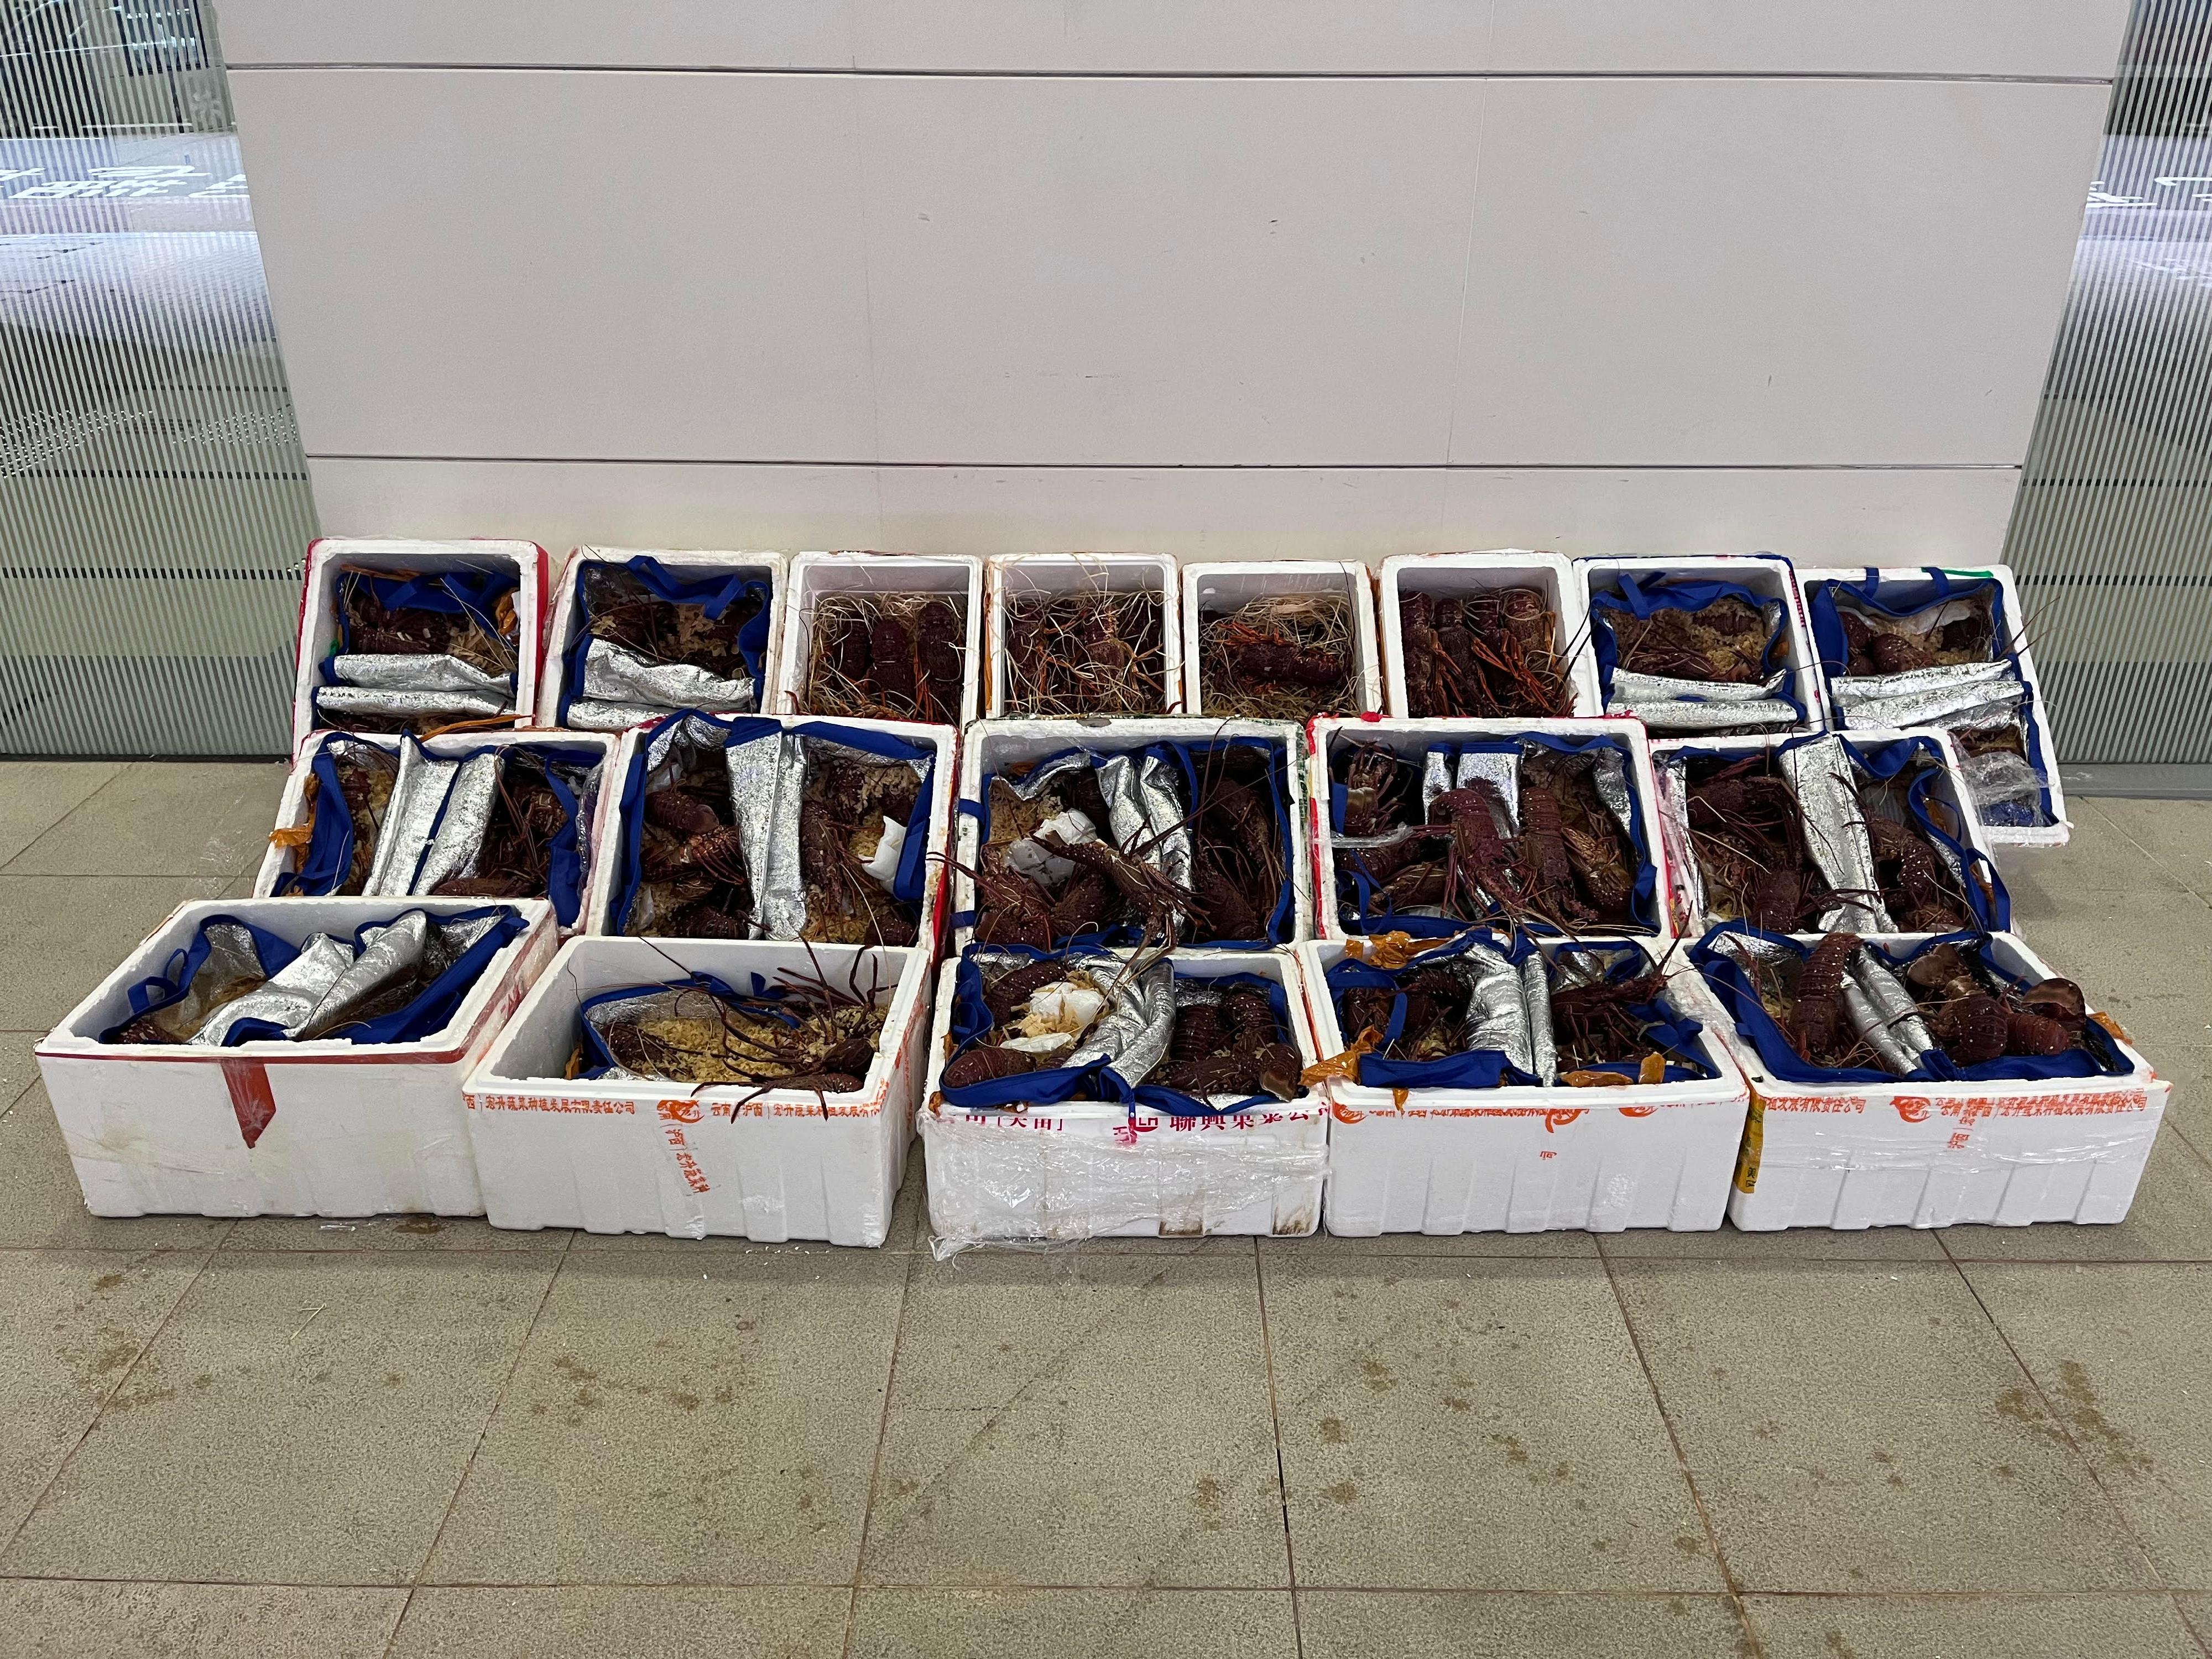 Hong Kong Customs yesterday (April 28) mounted an anti-smuggling operation at the Hong Kong-Zhuhai-Macao Bridge Hong Kong Port and detected a suspected smuggling case involving a cross-boundary private car. About 280 kilograms of unmanifested live lobsters and 70 pieces of unmanifested high-value computer display cards with a total estimated market value of about $600,000 were seized. Photo shows the unmanifested live lobsters seized.